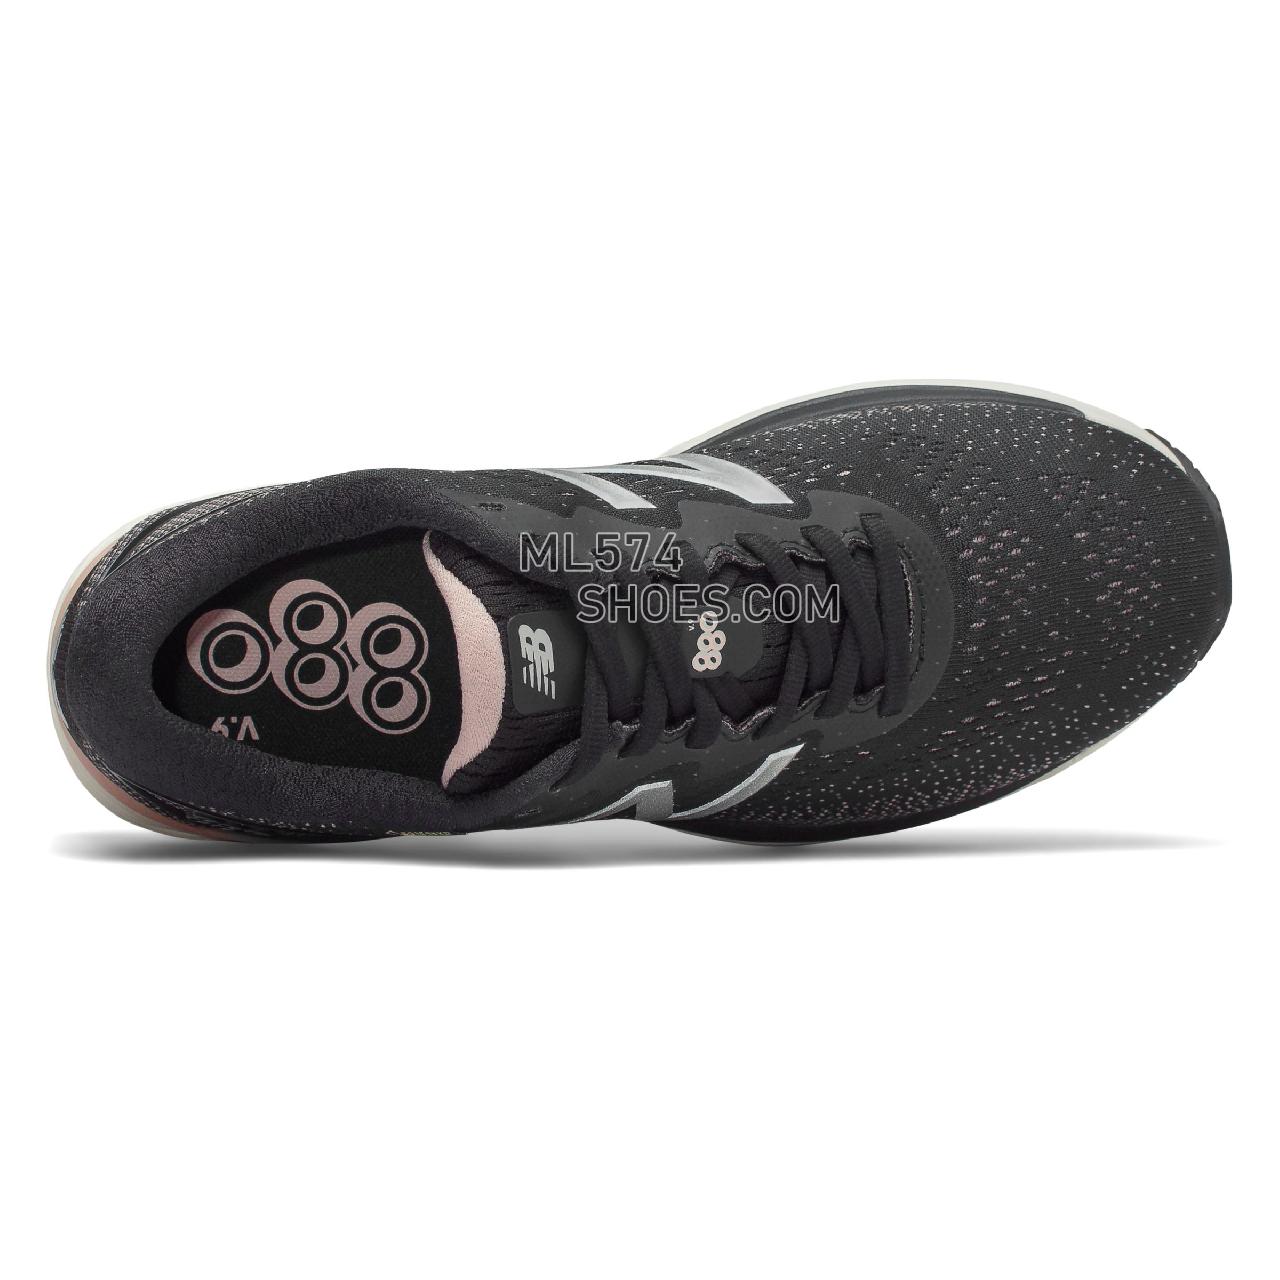 New Balance 880v9 GTX - Women's Neutral Running - Black with Magnet and White Oak - W880GT9